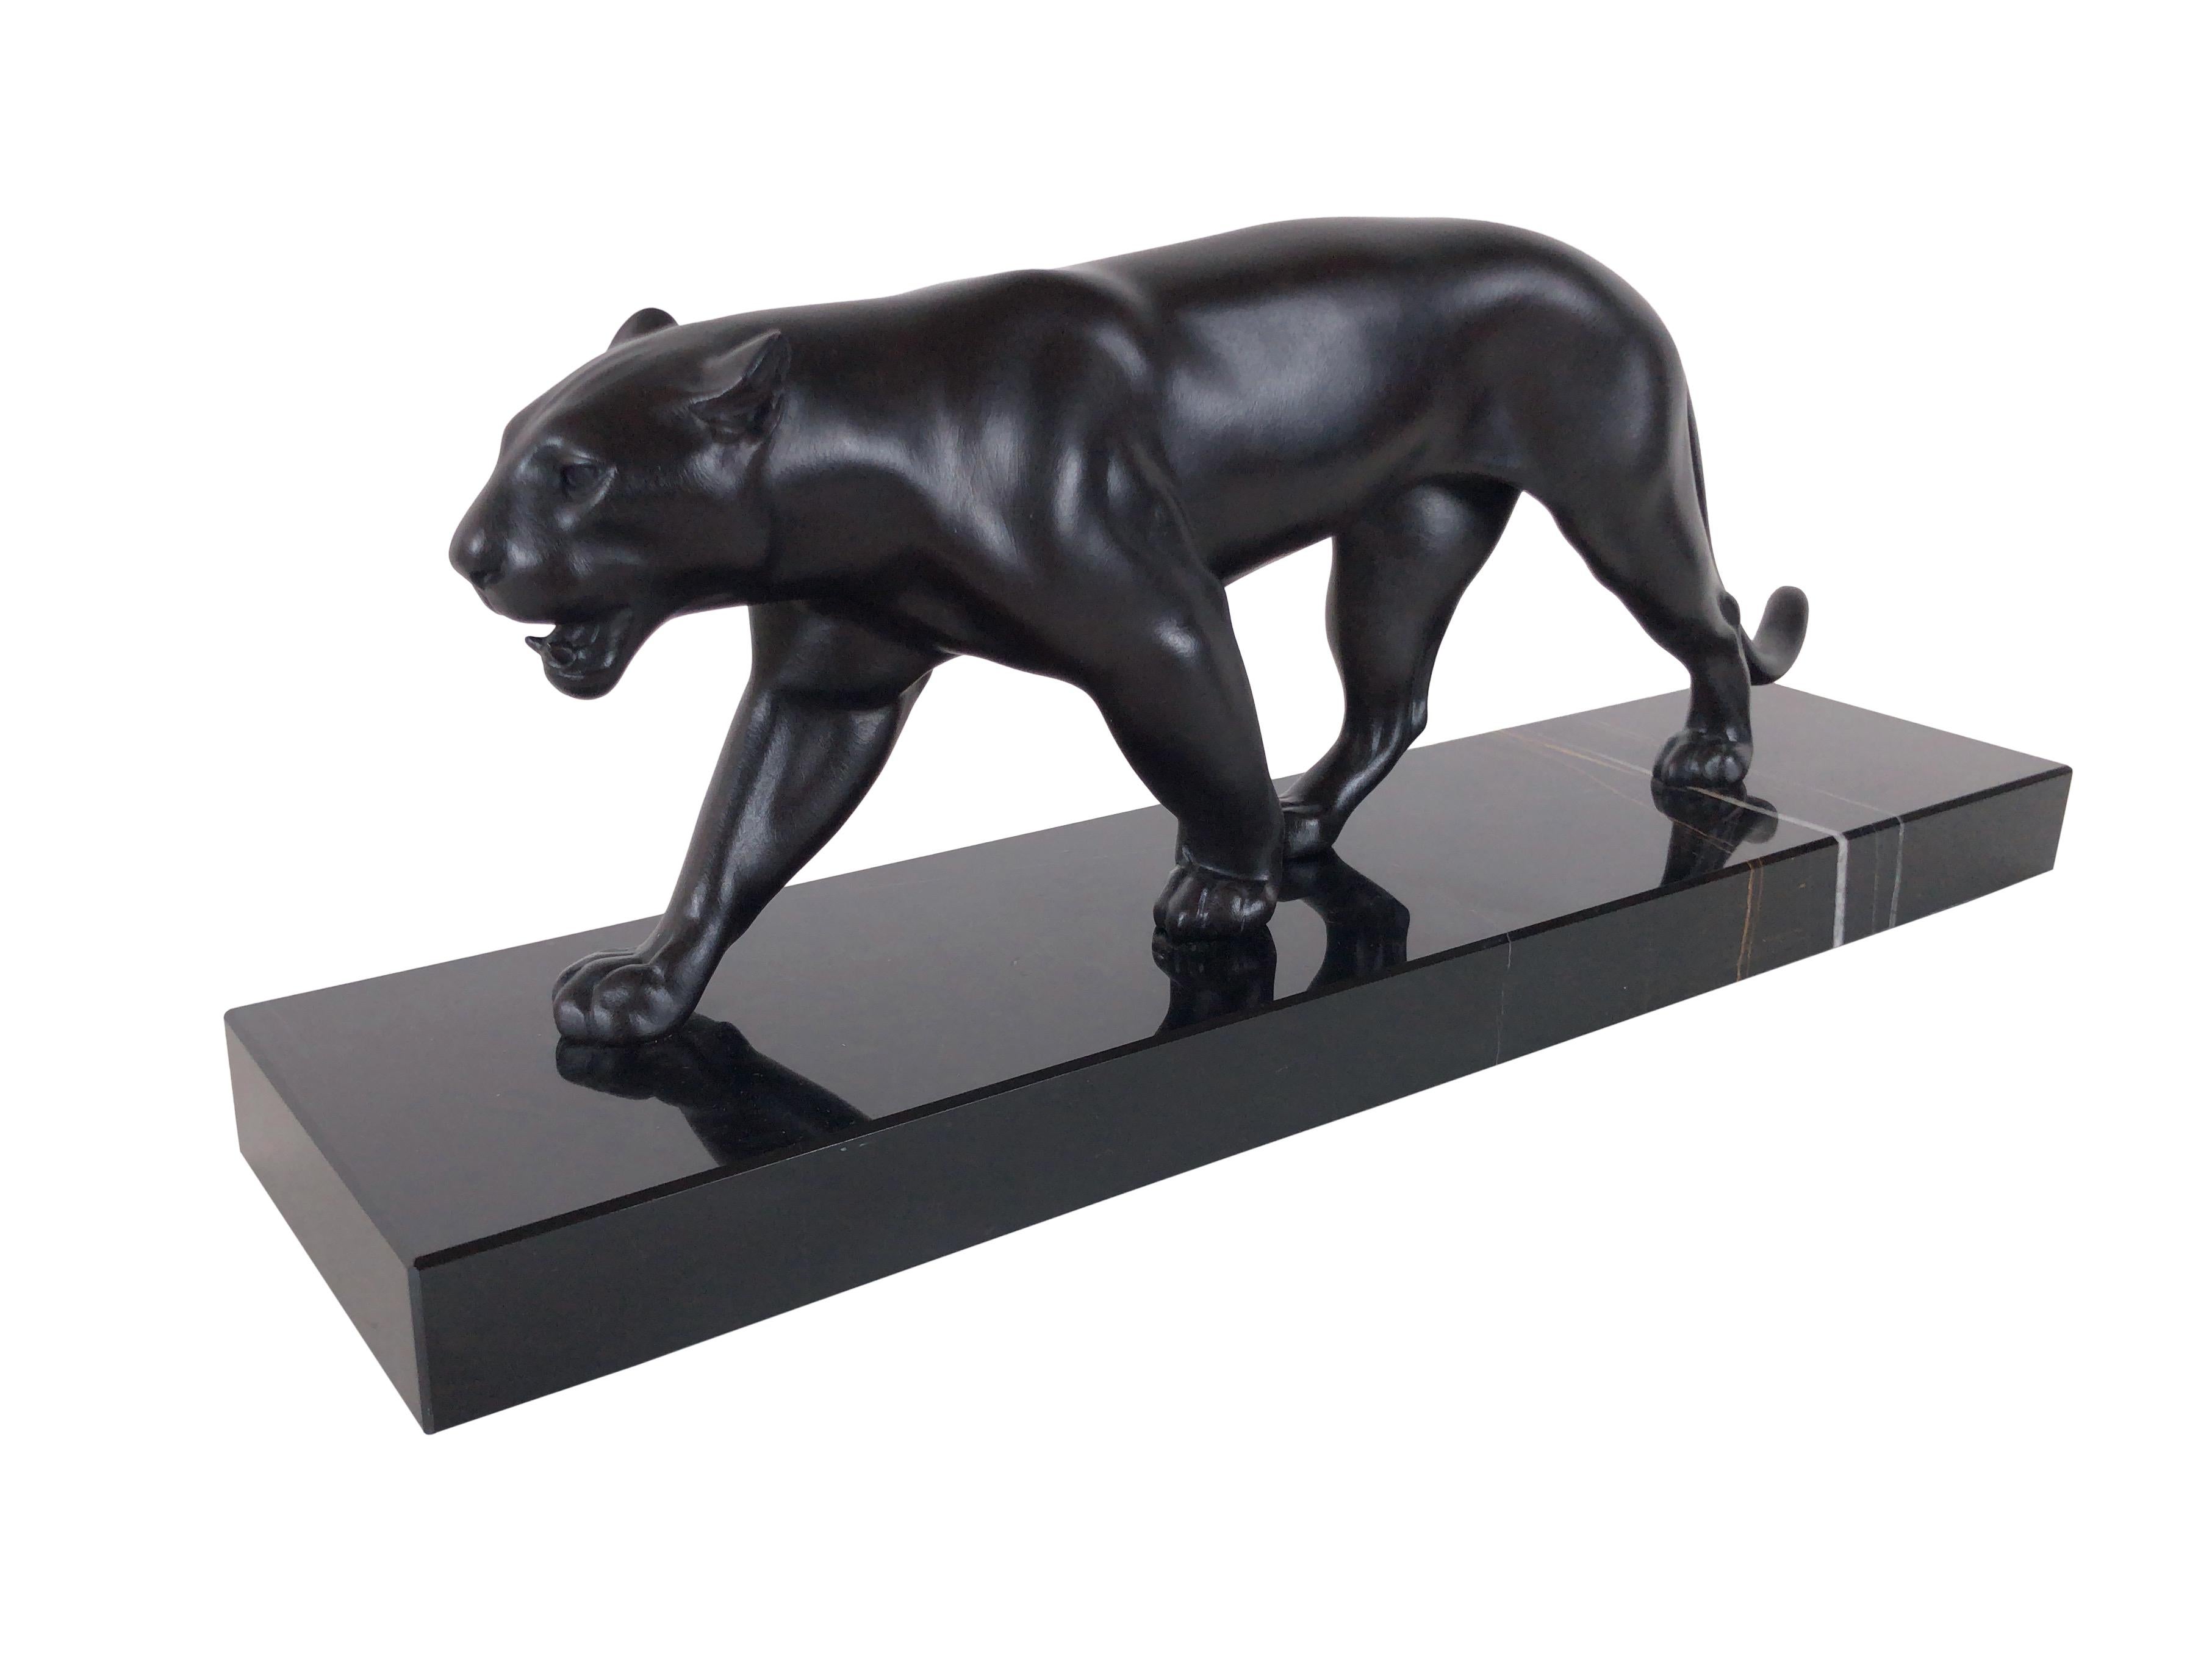 Ouganda Animal Sculpture Black Panther French Art Deco Style by Max Le Verrier In Good Condition For Sale In Ulm, DE